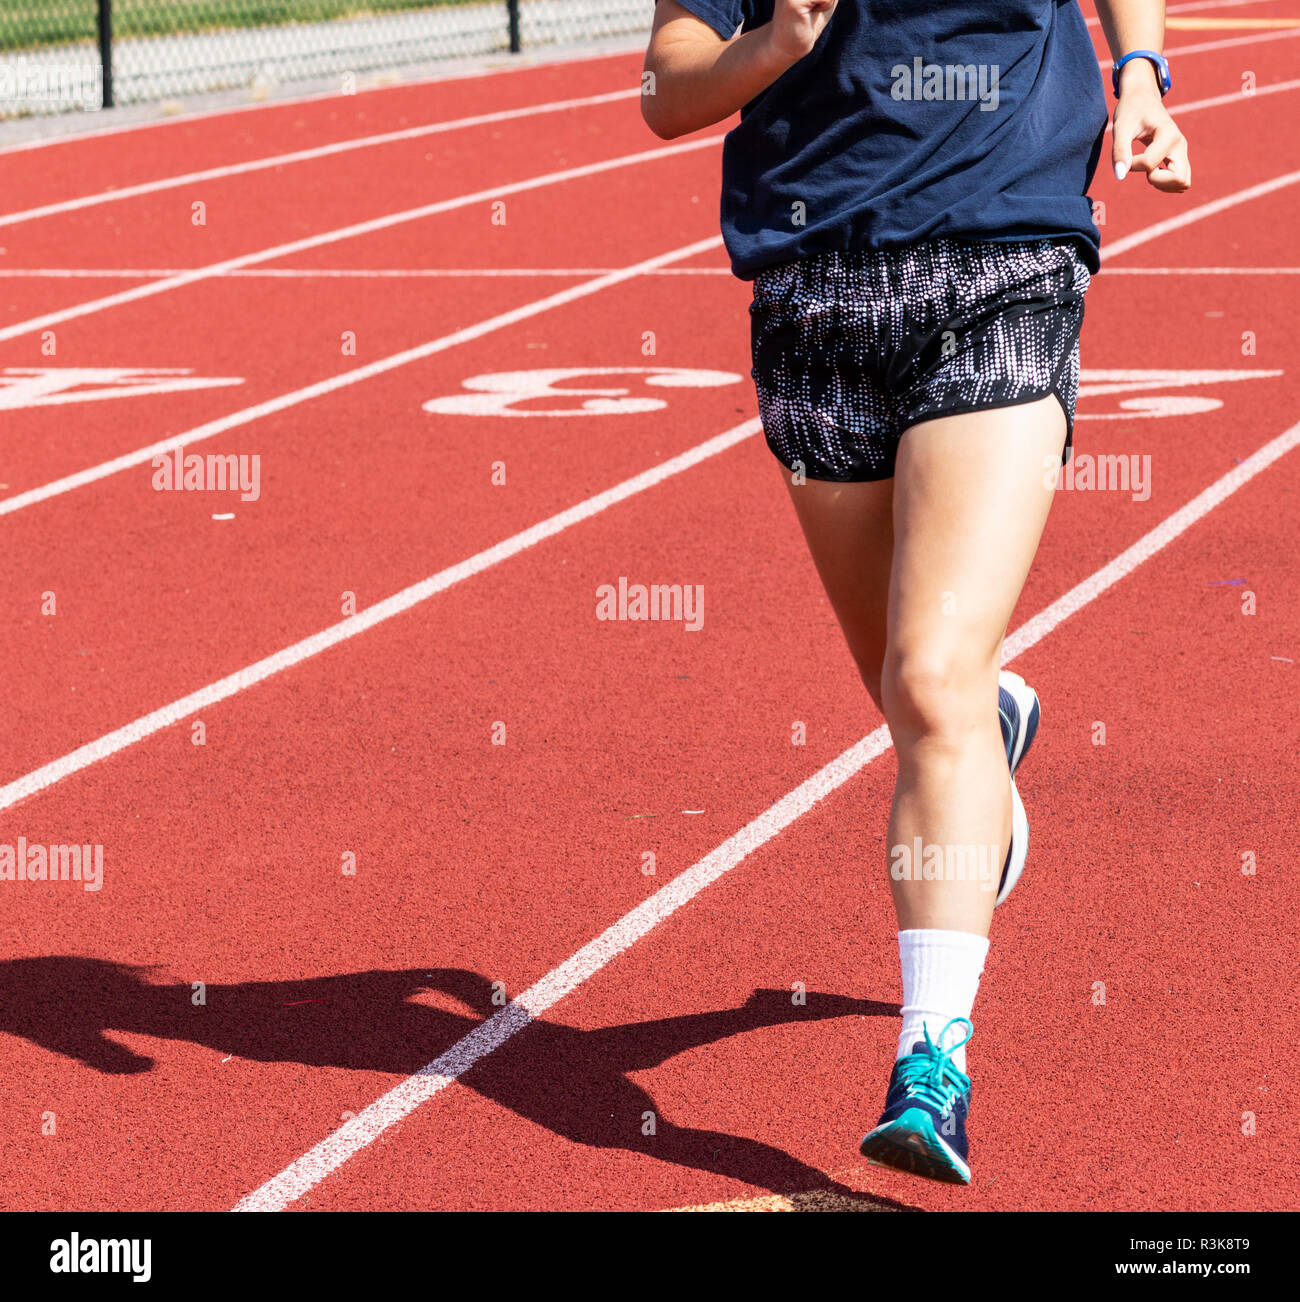 Girl Running On Track: Over 41,931 Royalty-Free Licensable Stock Photos